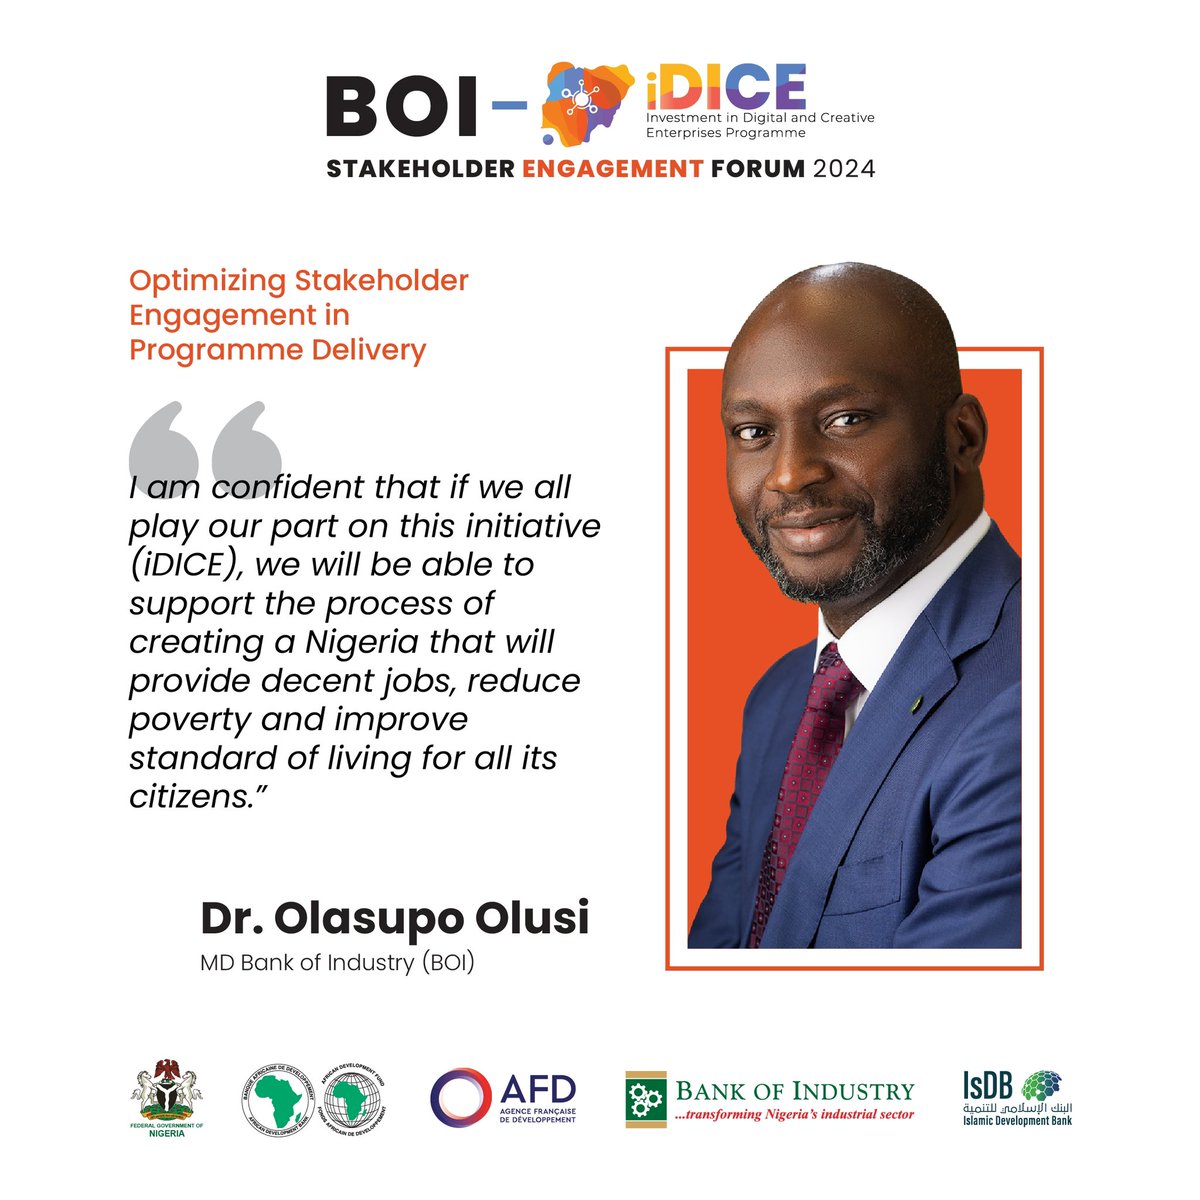 The Bank of Industry (BOI) serves as the Executing Agency for the iDICE program. Co-financiers include African Development Bank (AfDB), Agence française de développement (AFD), Islamic Development Bank (IsDB). Find out more idice.ng